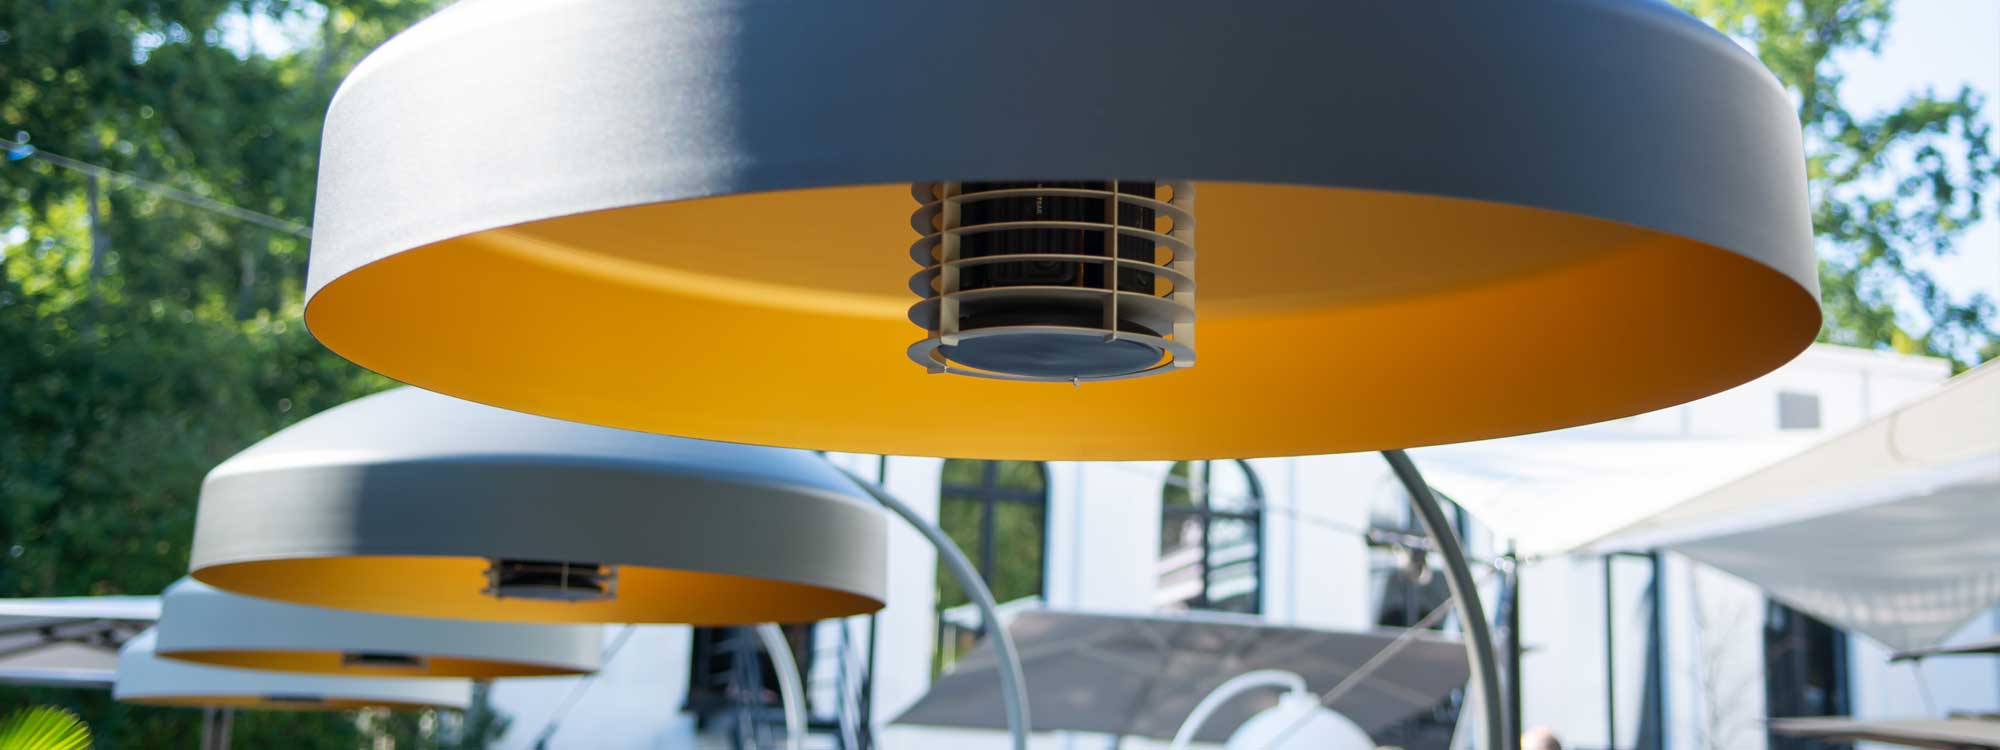 Image of Disc heater’s golden hood interior by Heatsail FAR infrared heating company